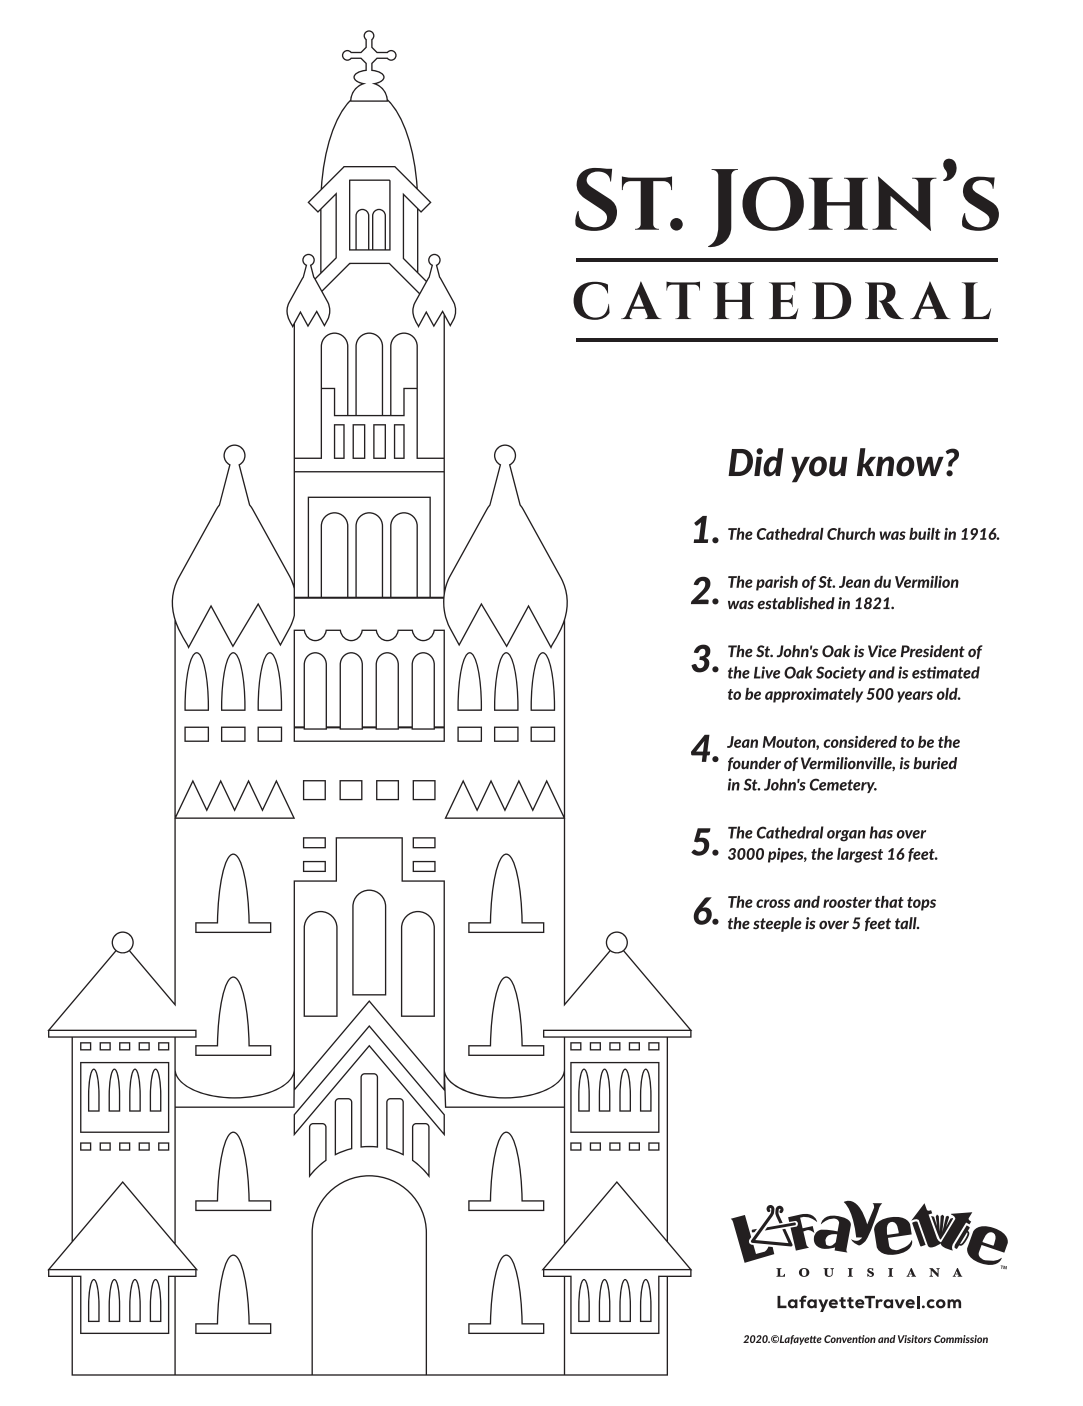 Cathedral of St. John Coloring Sheet